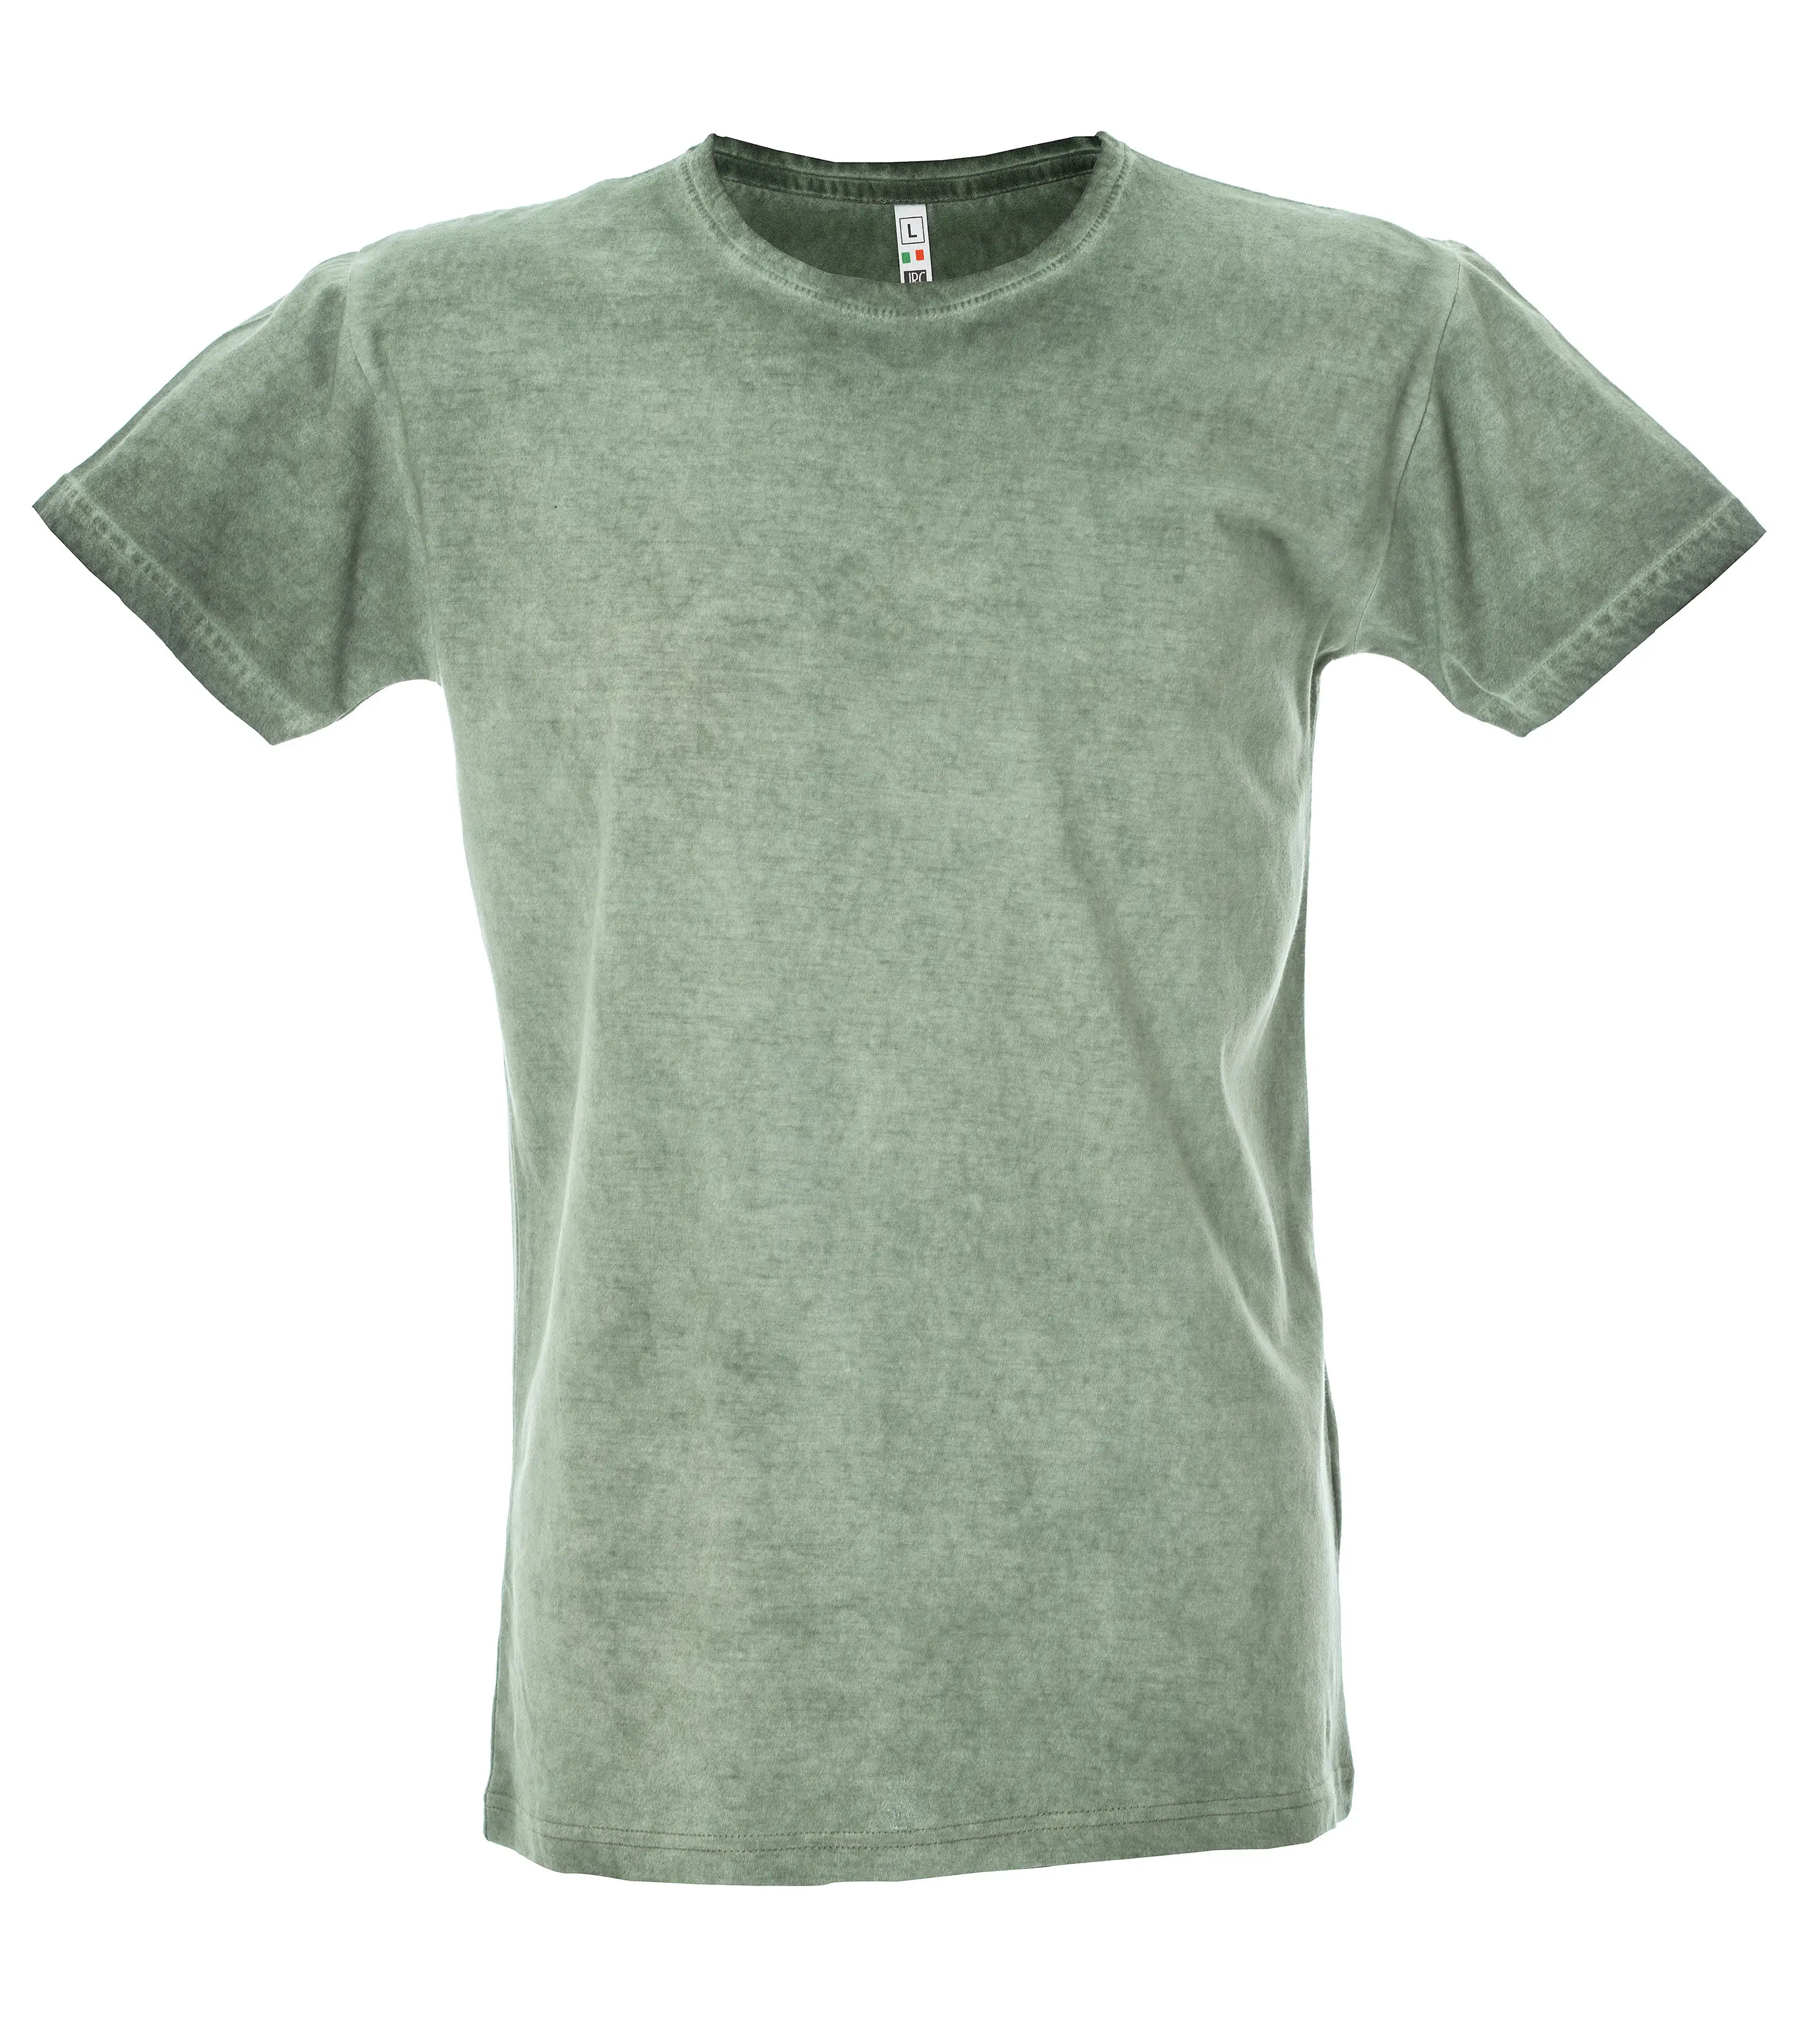 T-shirt cardiff - army green - s